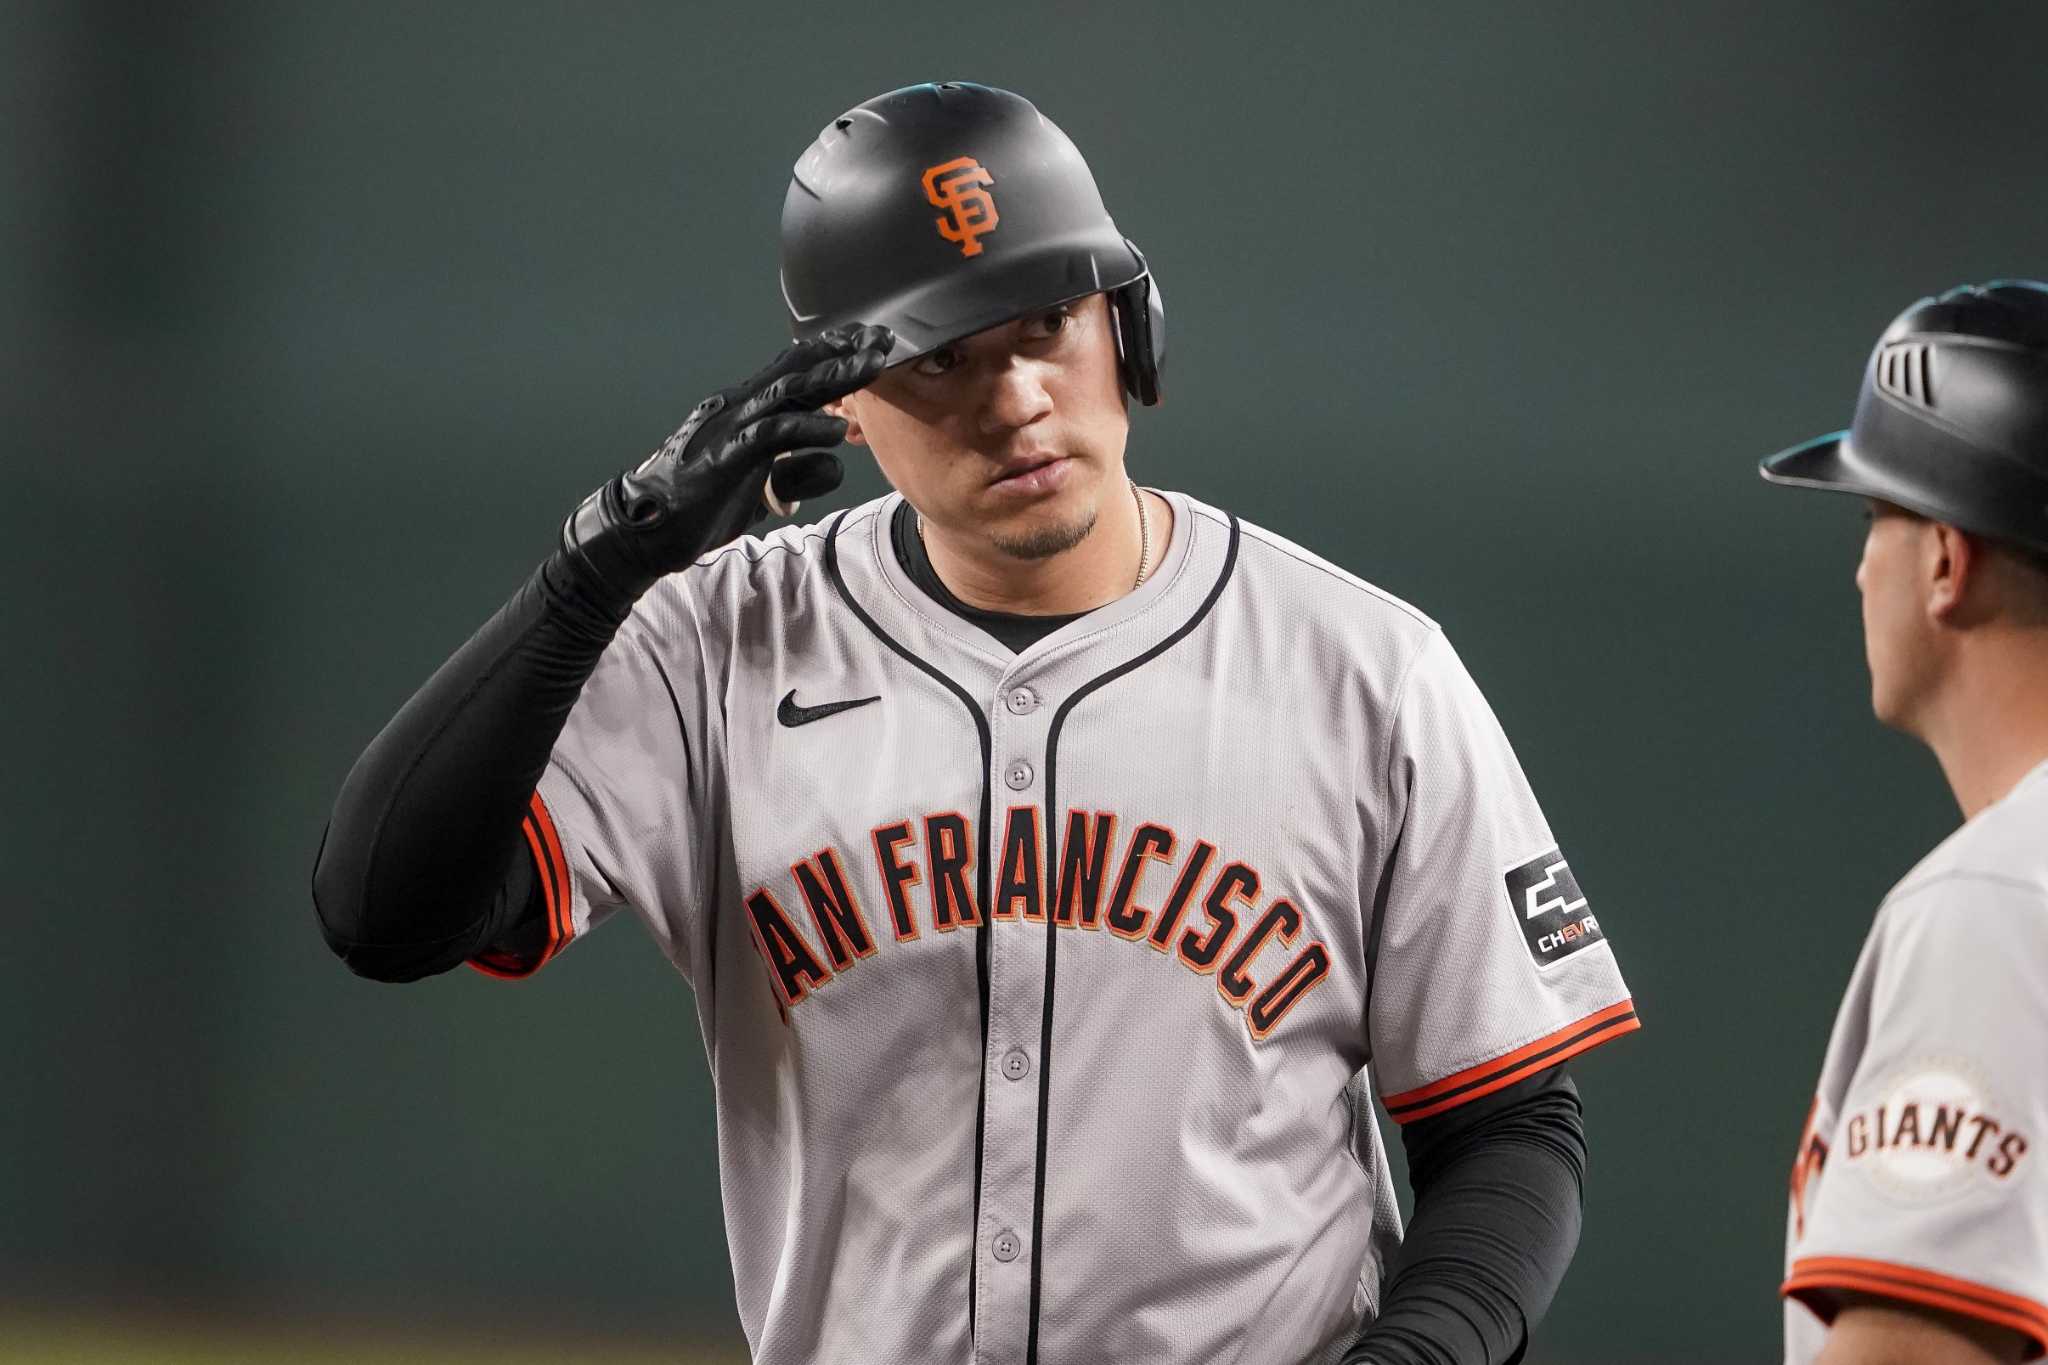 Wilmer Flores' grand slam helps Giants snap 6-game skid with 9-3 win over Diamondbacks